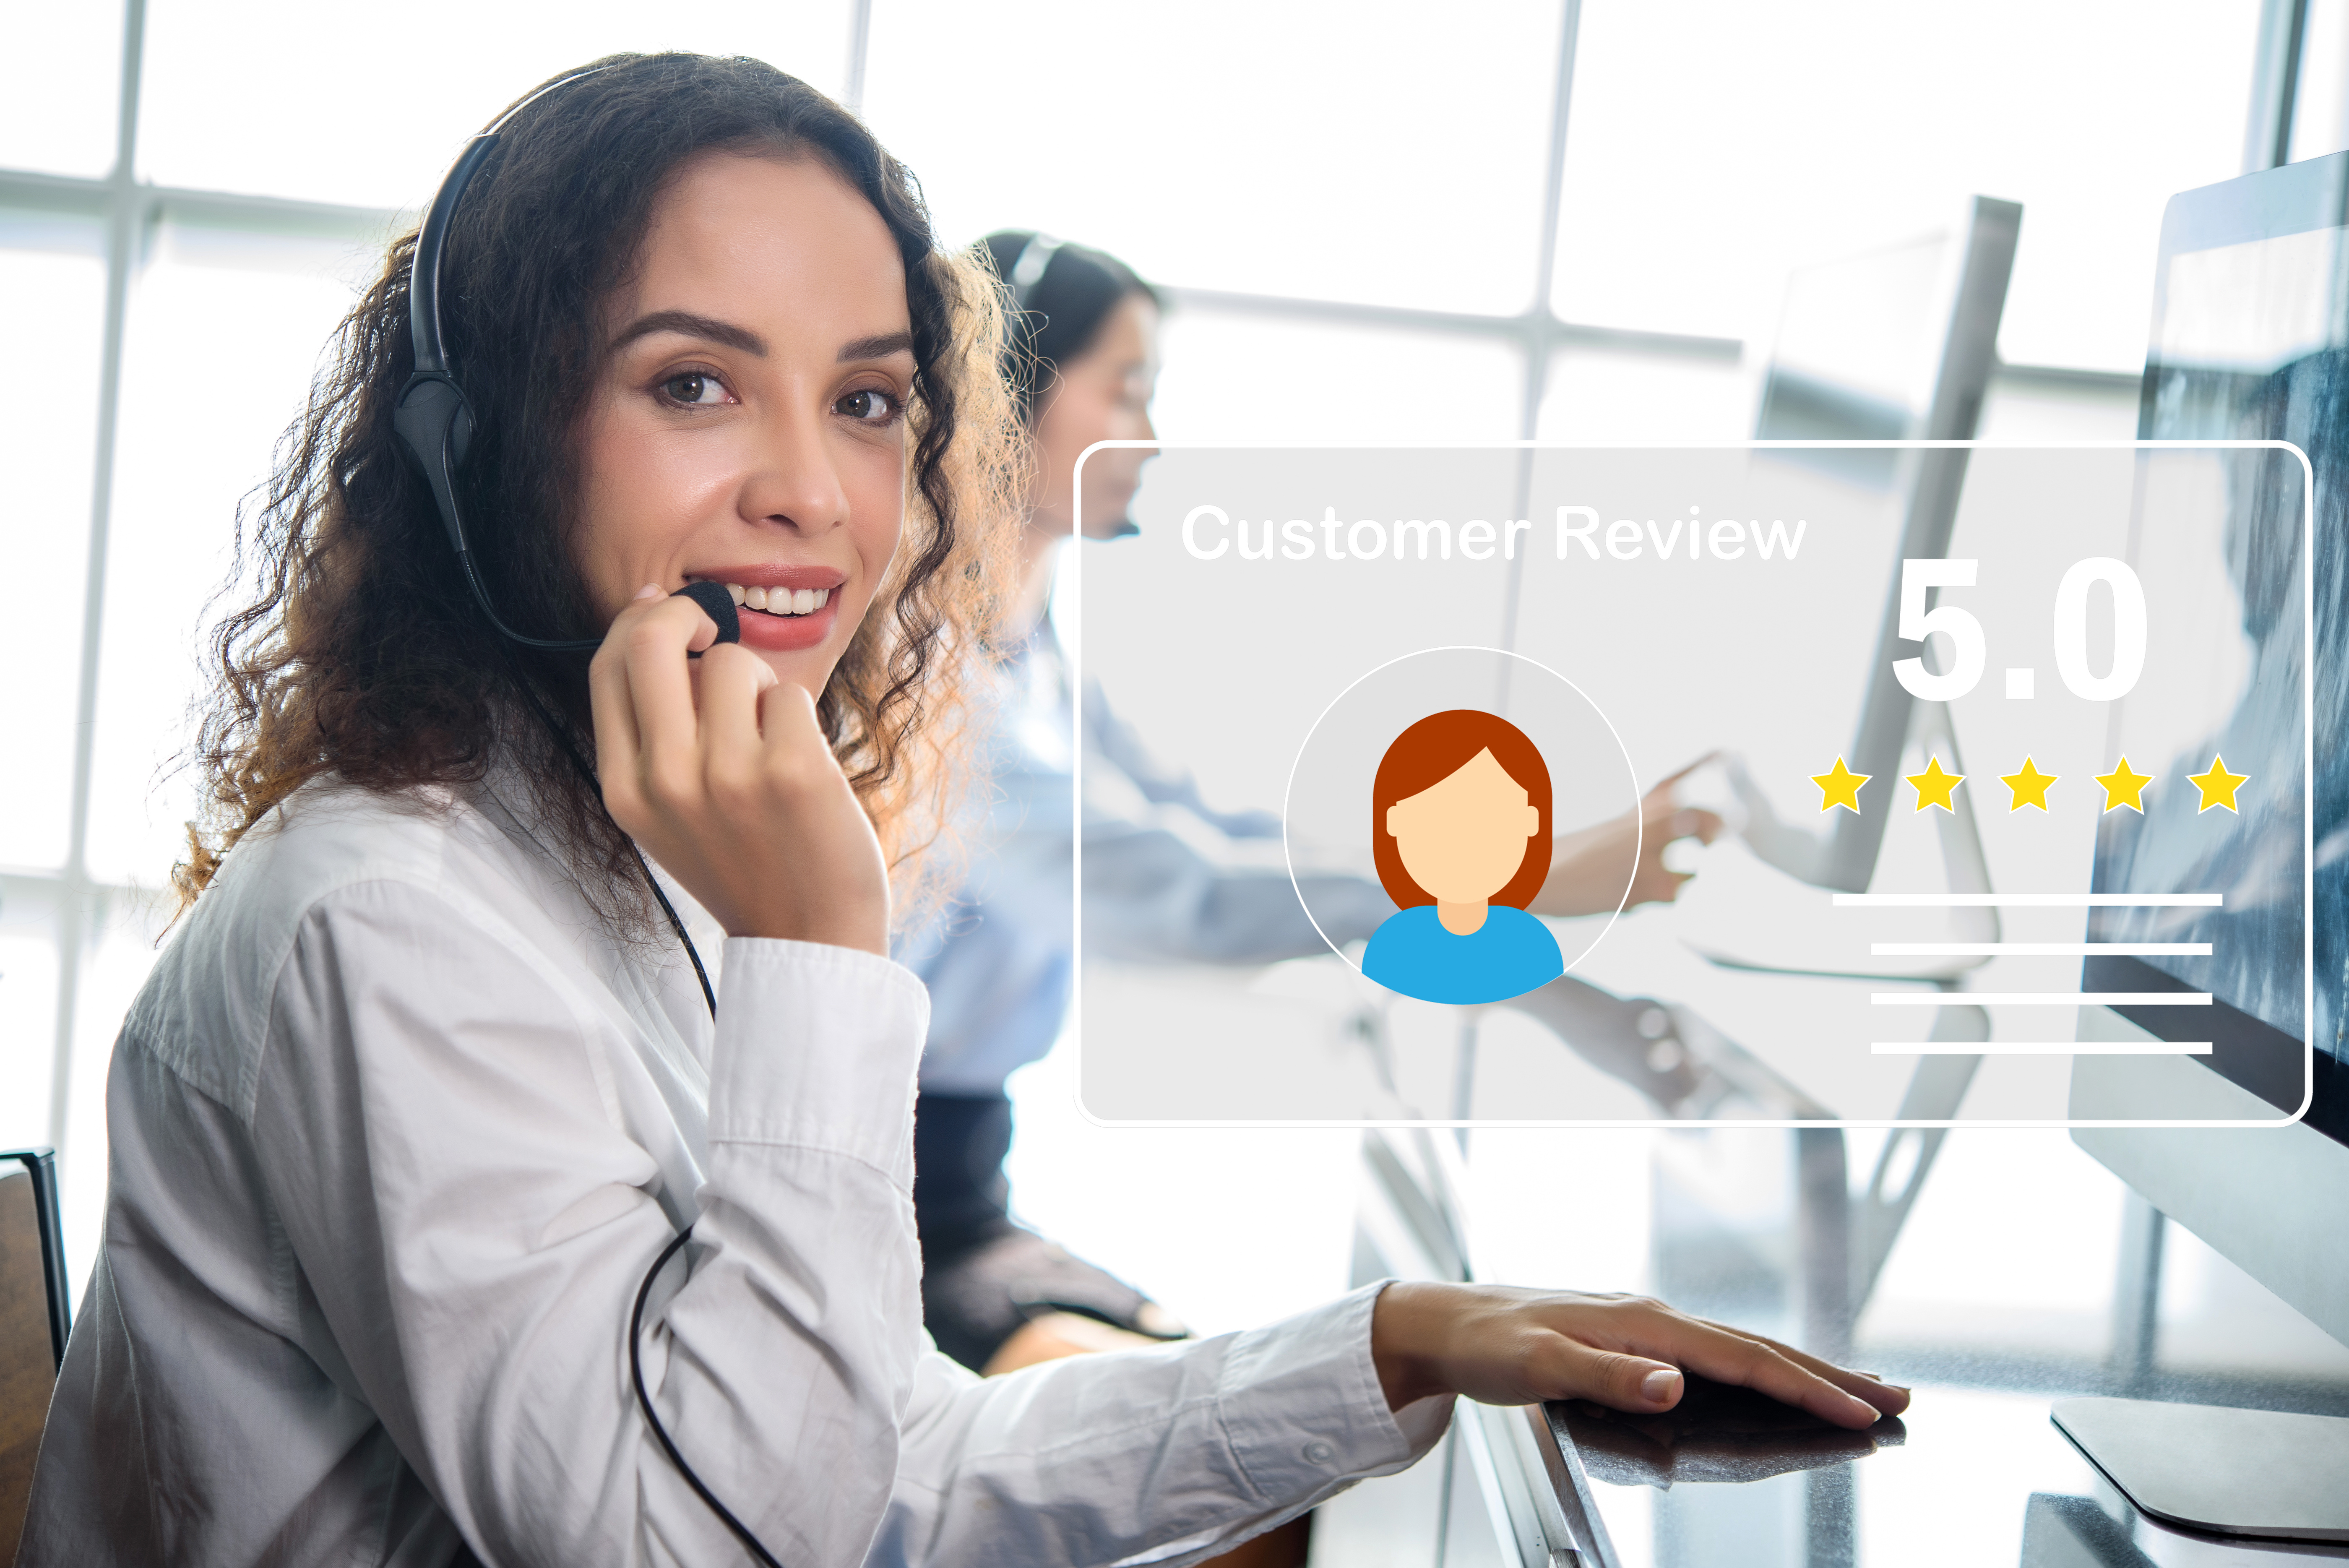 Positive customer review of call center support